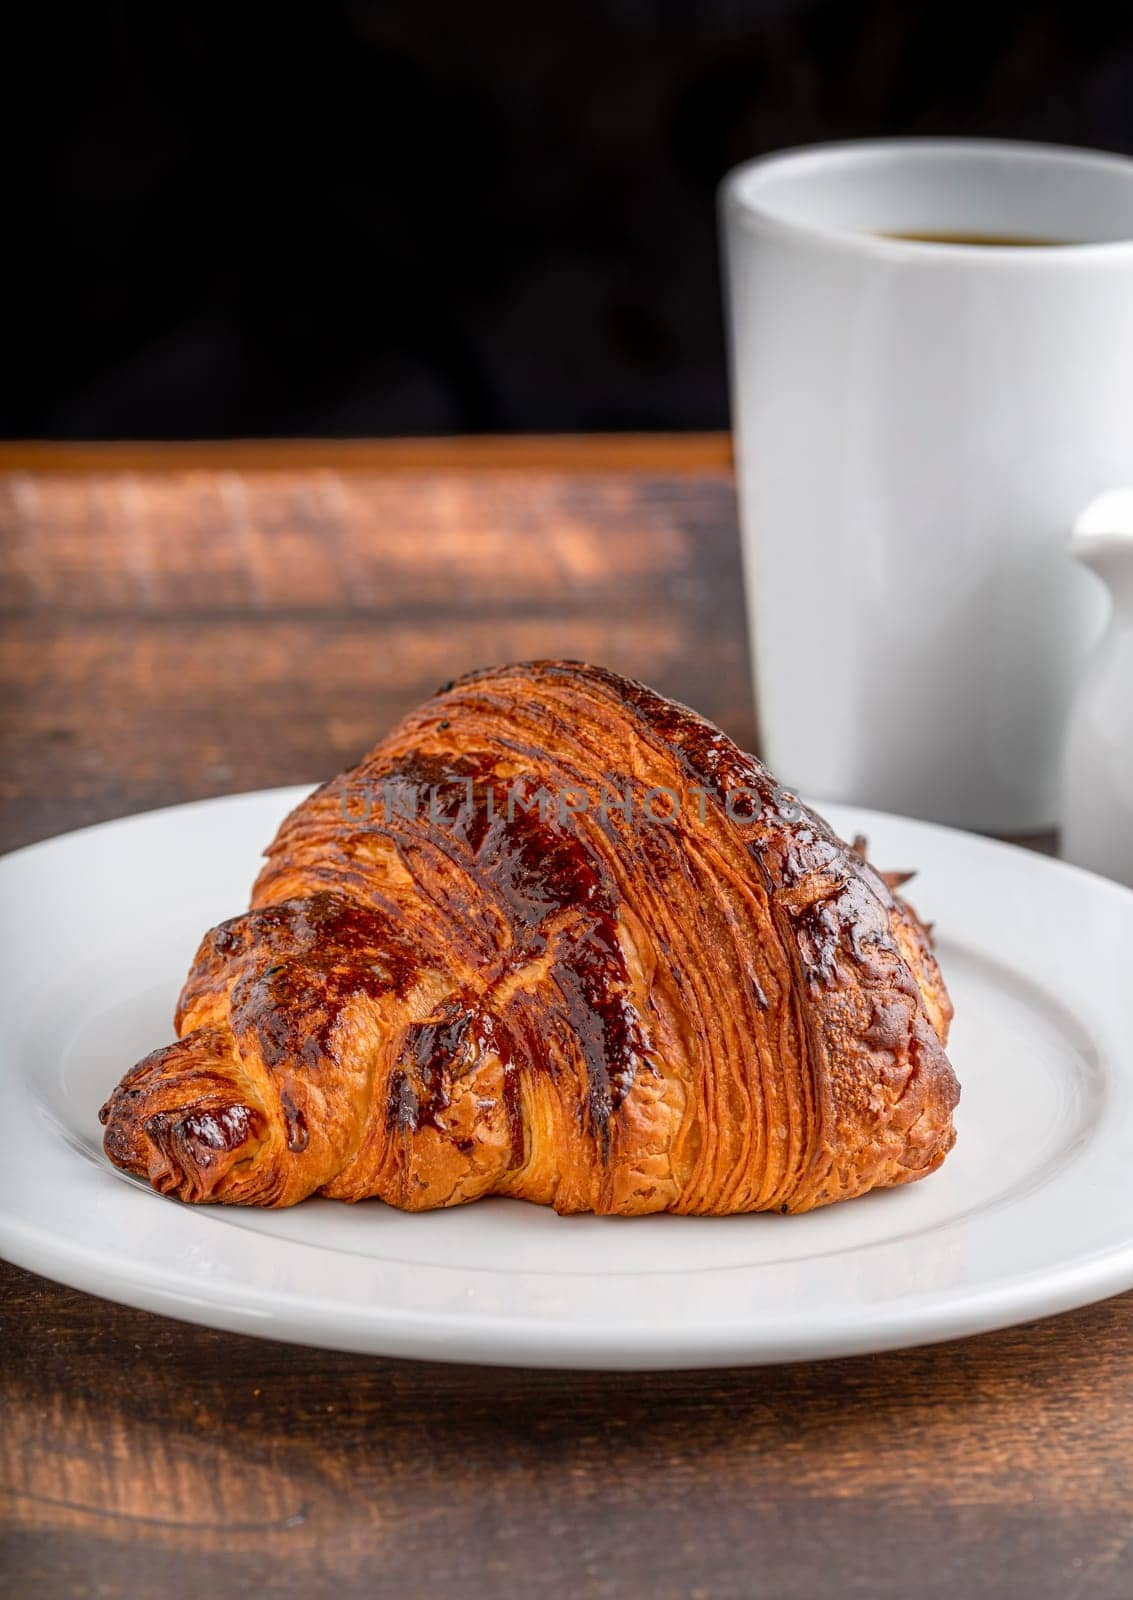 Croissant with coffee next to it on wooden table by Sonat